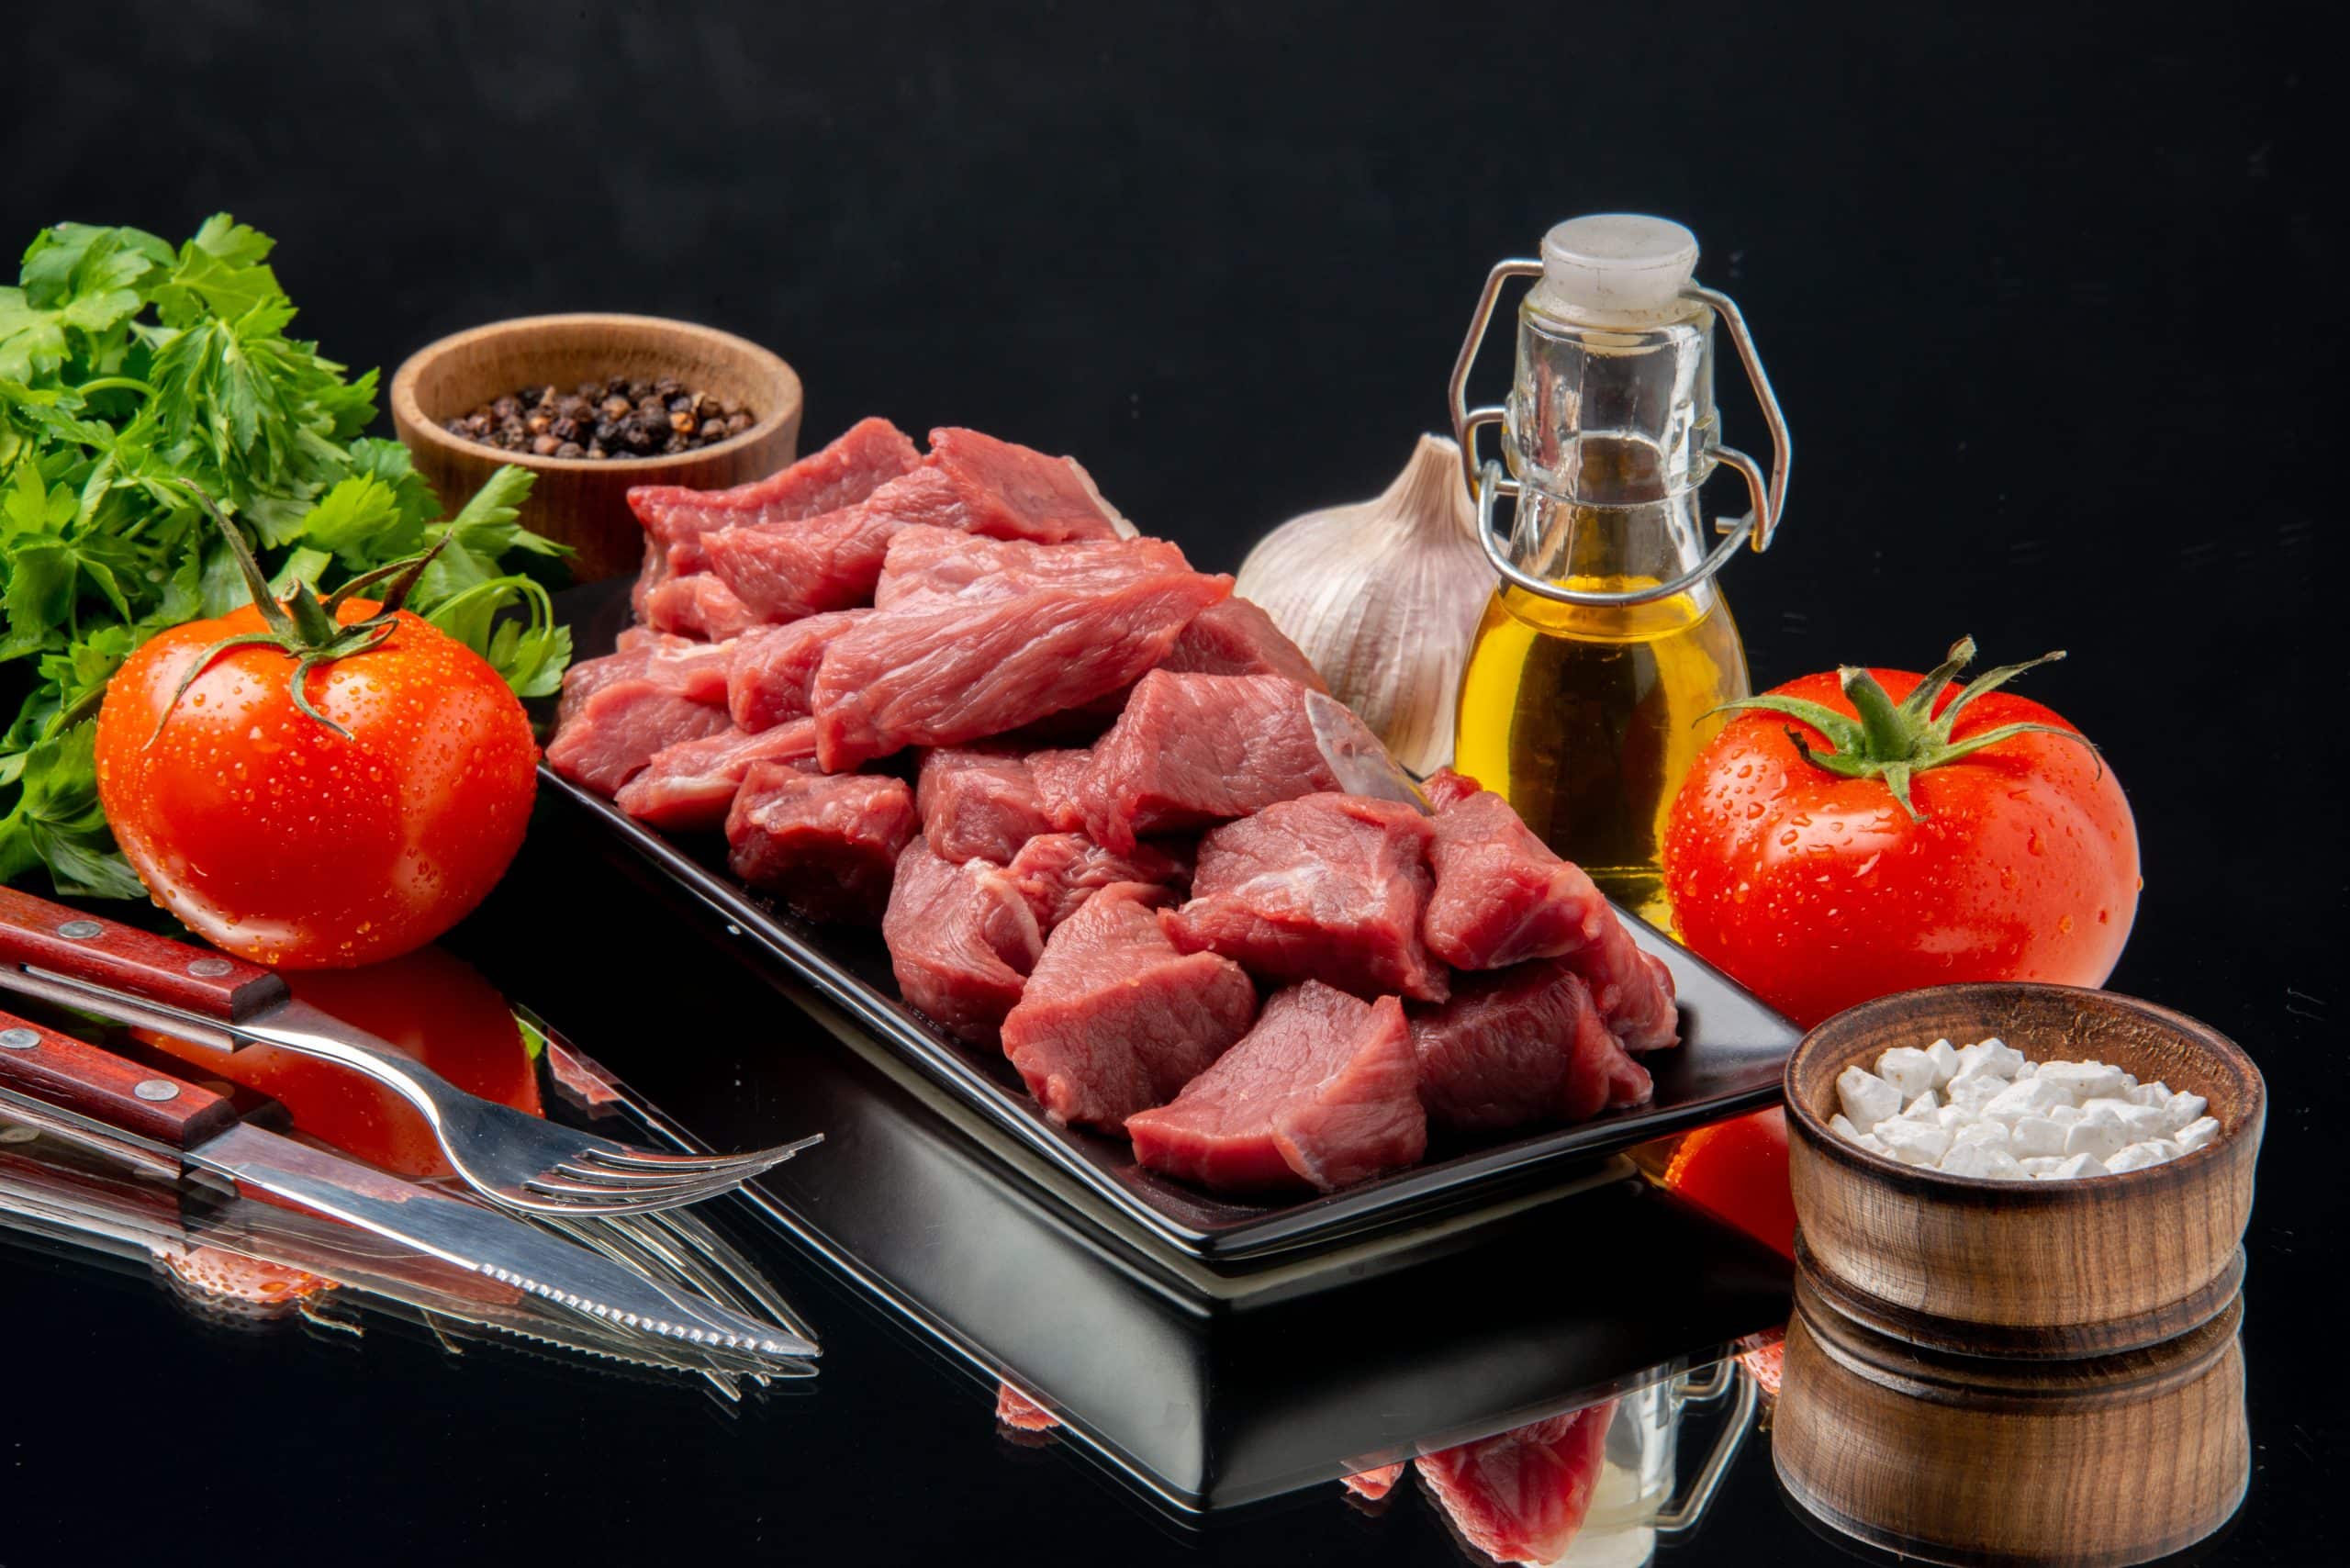 front-view-fresh-meat-slices-inside-black-tray-with-tomatoes-greens-black-table